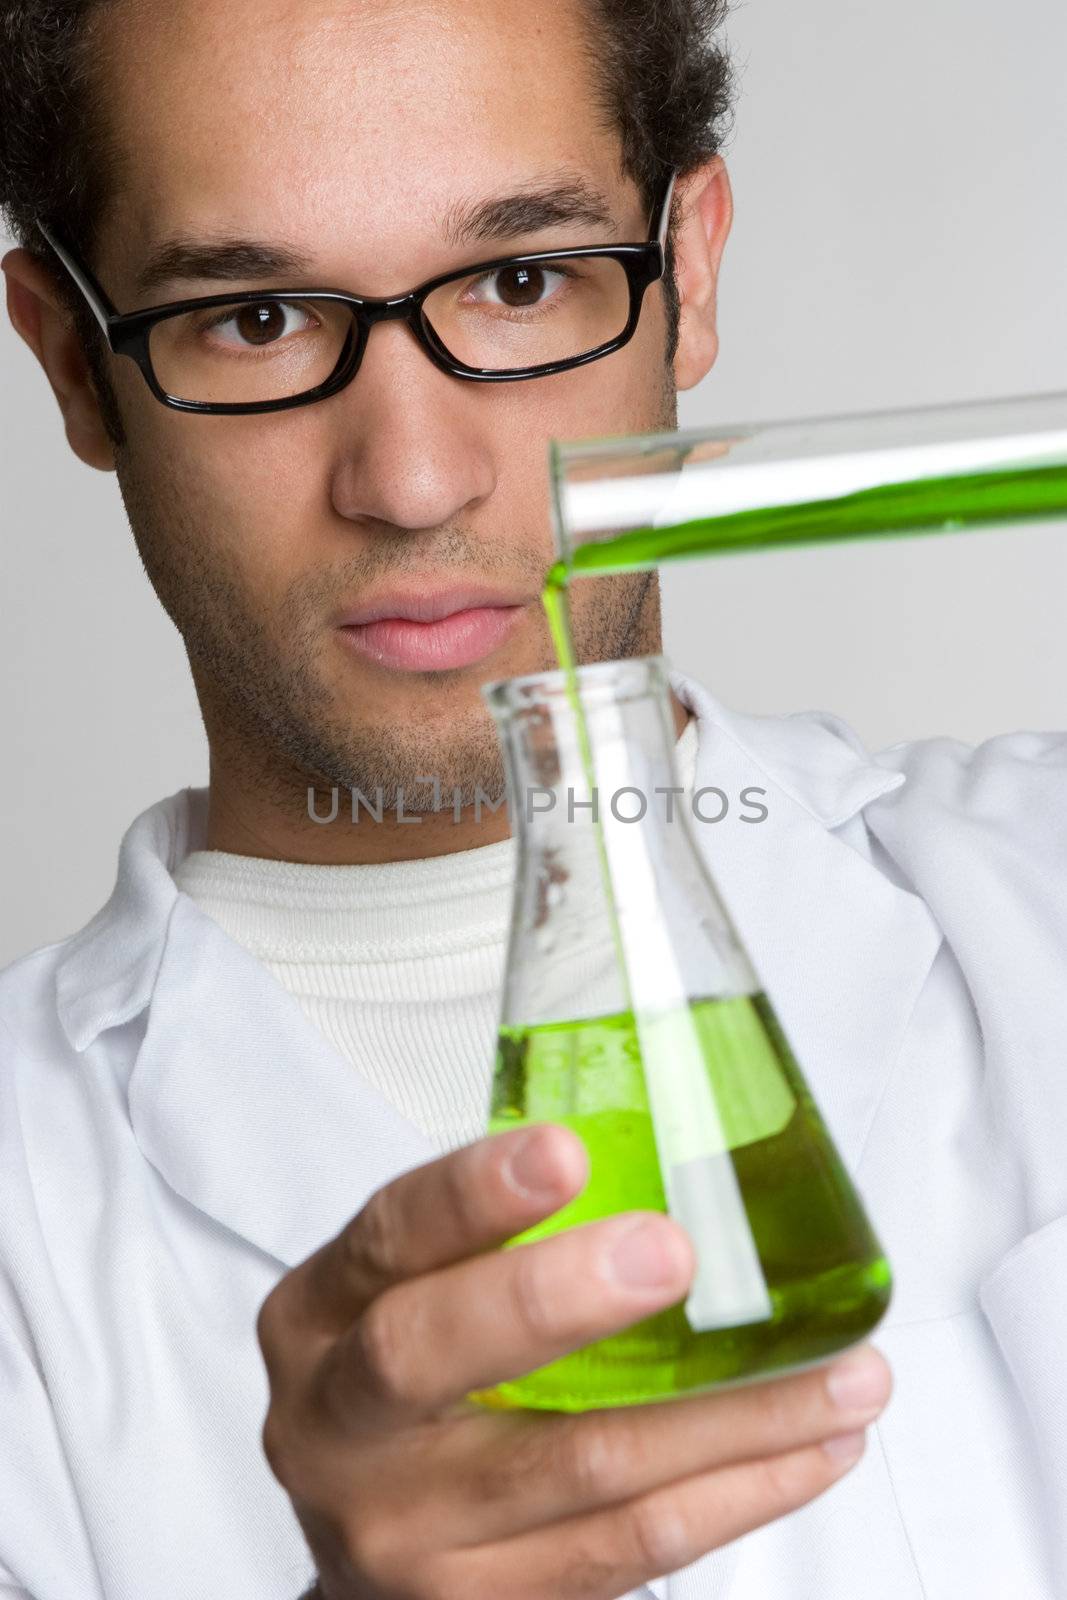 Man doing science experiment pouring liquid